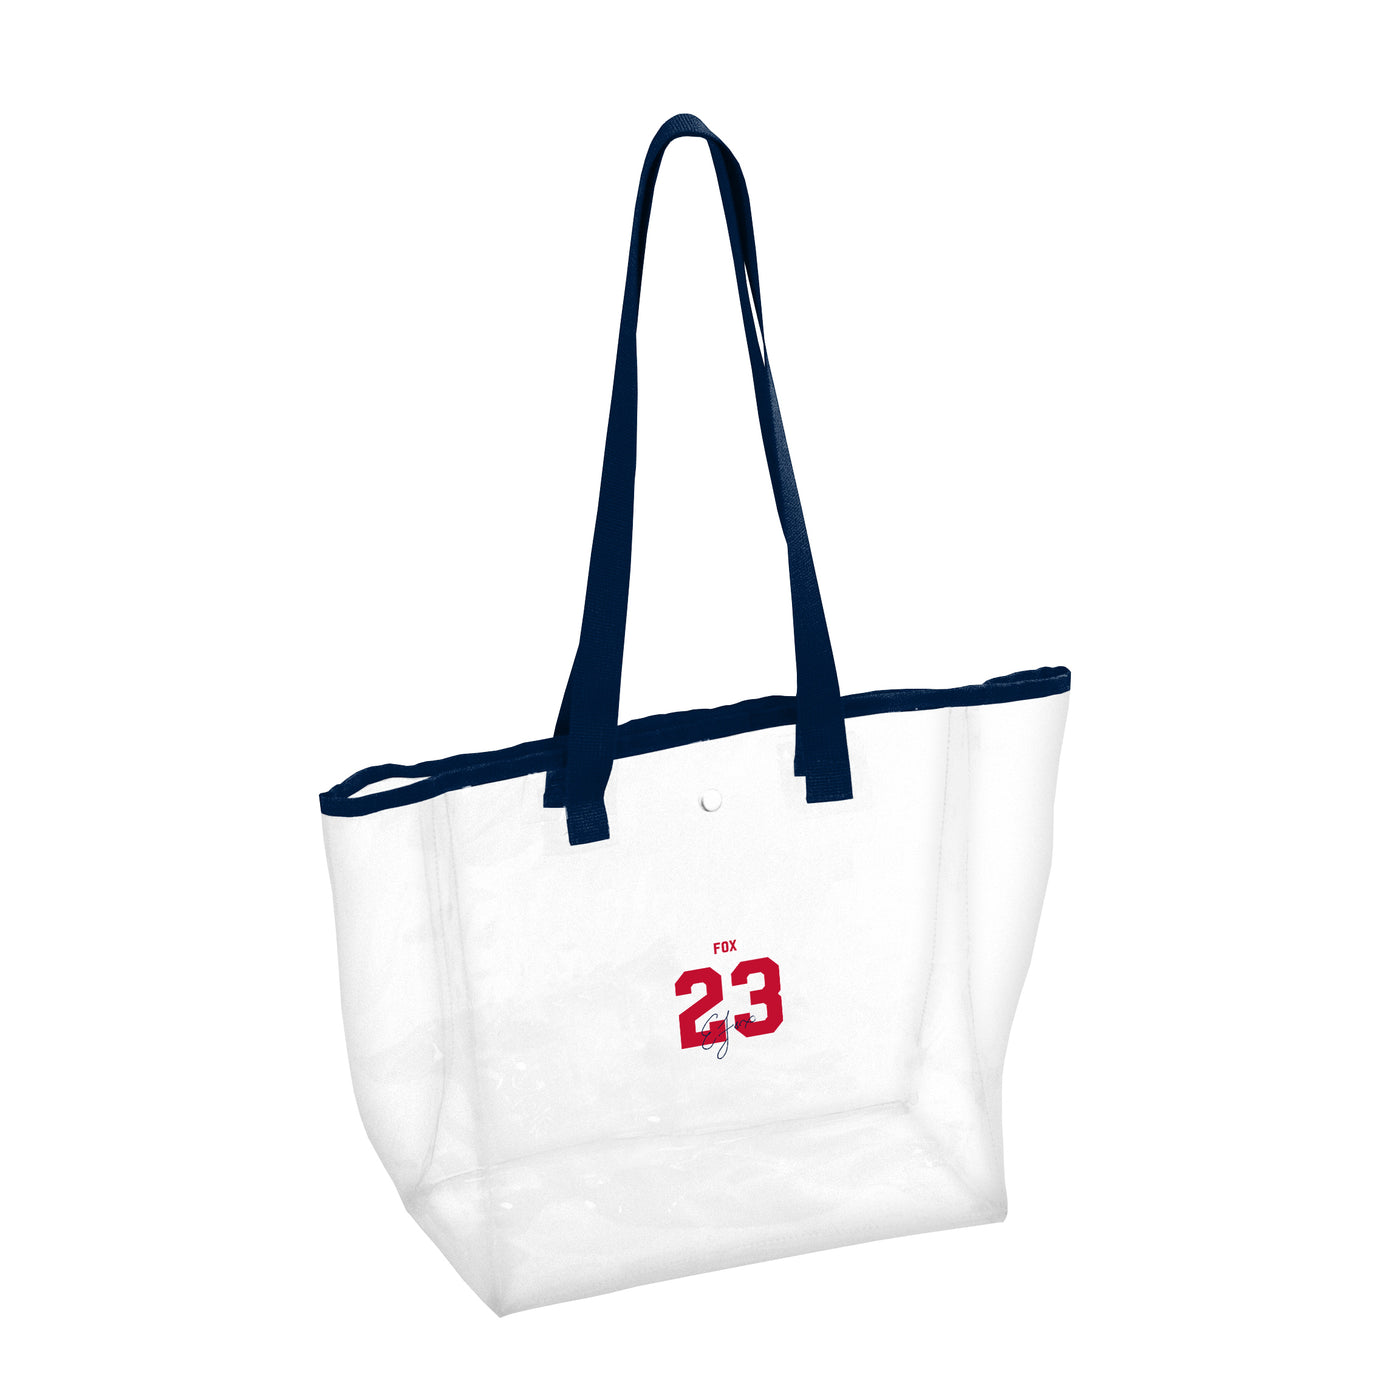 US Womens National Team Emily Fox Clear Tote